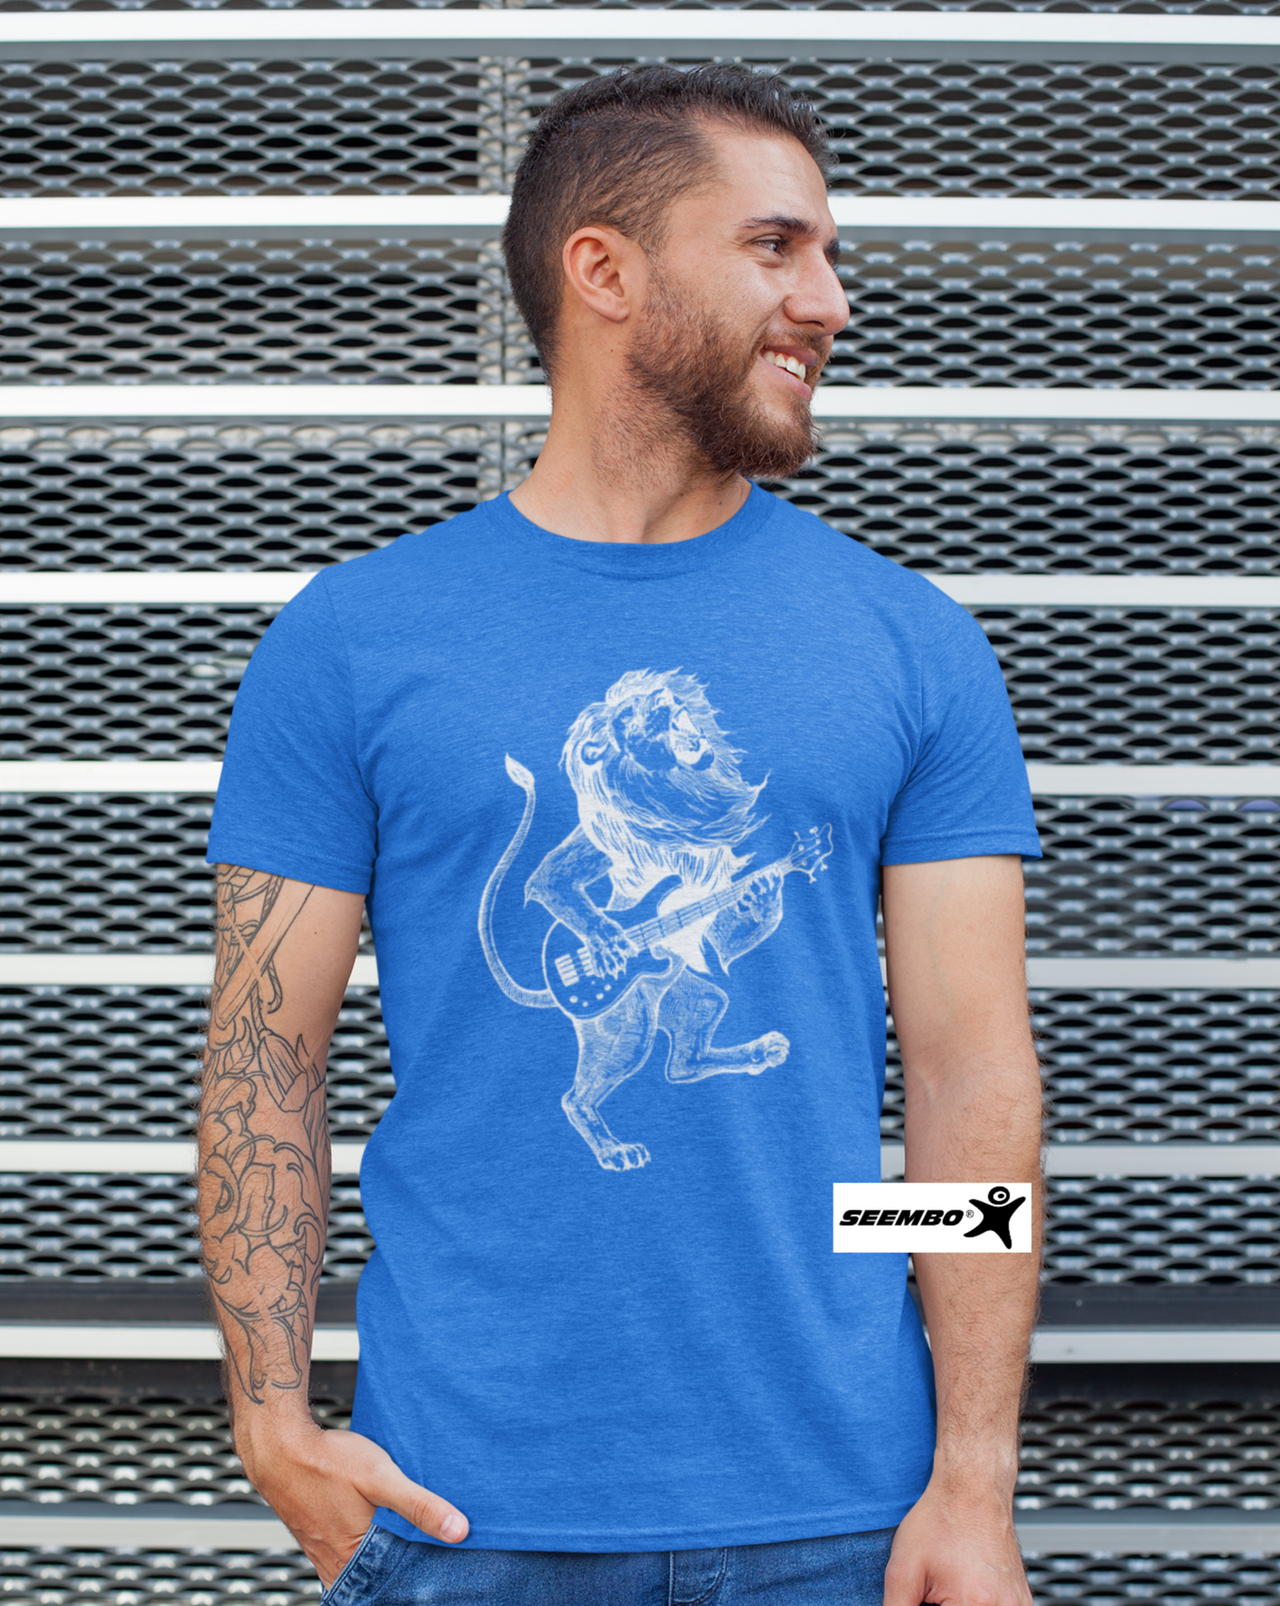 a-man-with-seembo-t-shirt-with-lion-playing-guitar-guitarist-art-in-a-vintage-royal-color